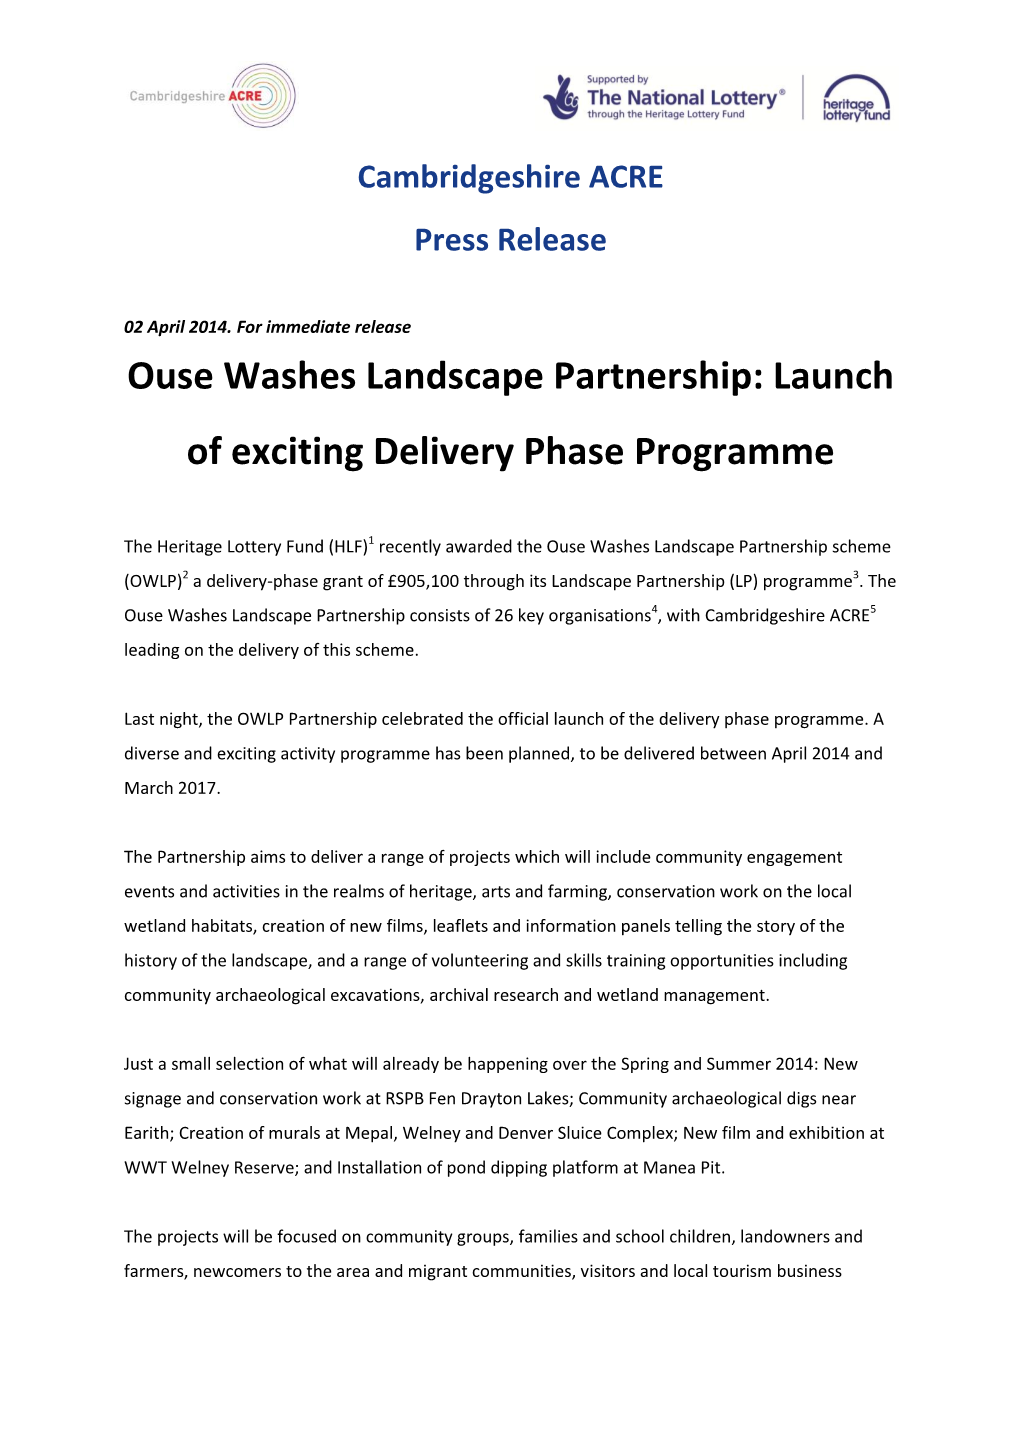 Ouse Washes Landscape Partnership: Launch of Exciting Delivery Phase Programme